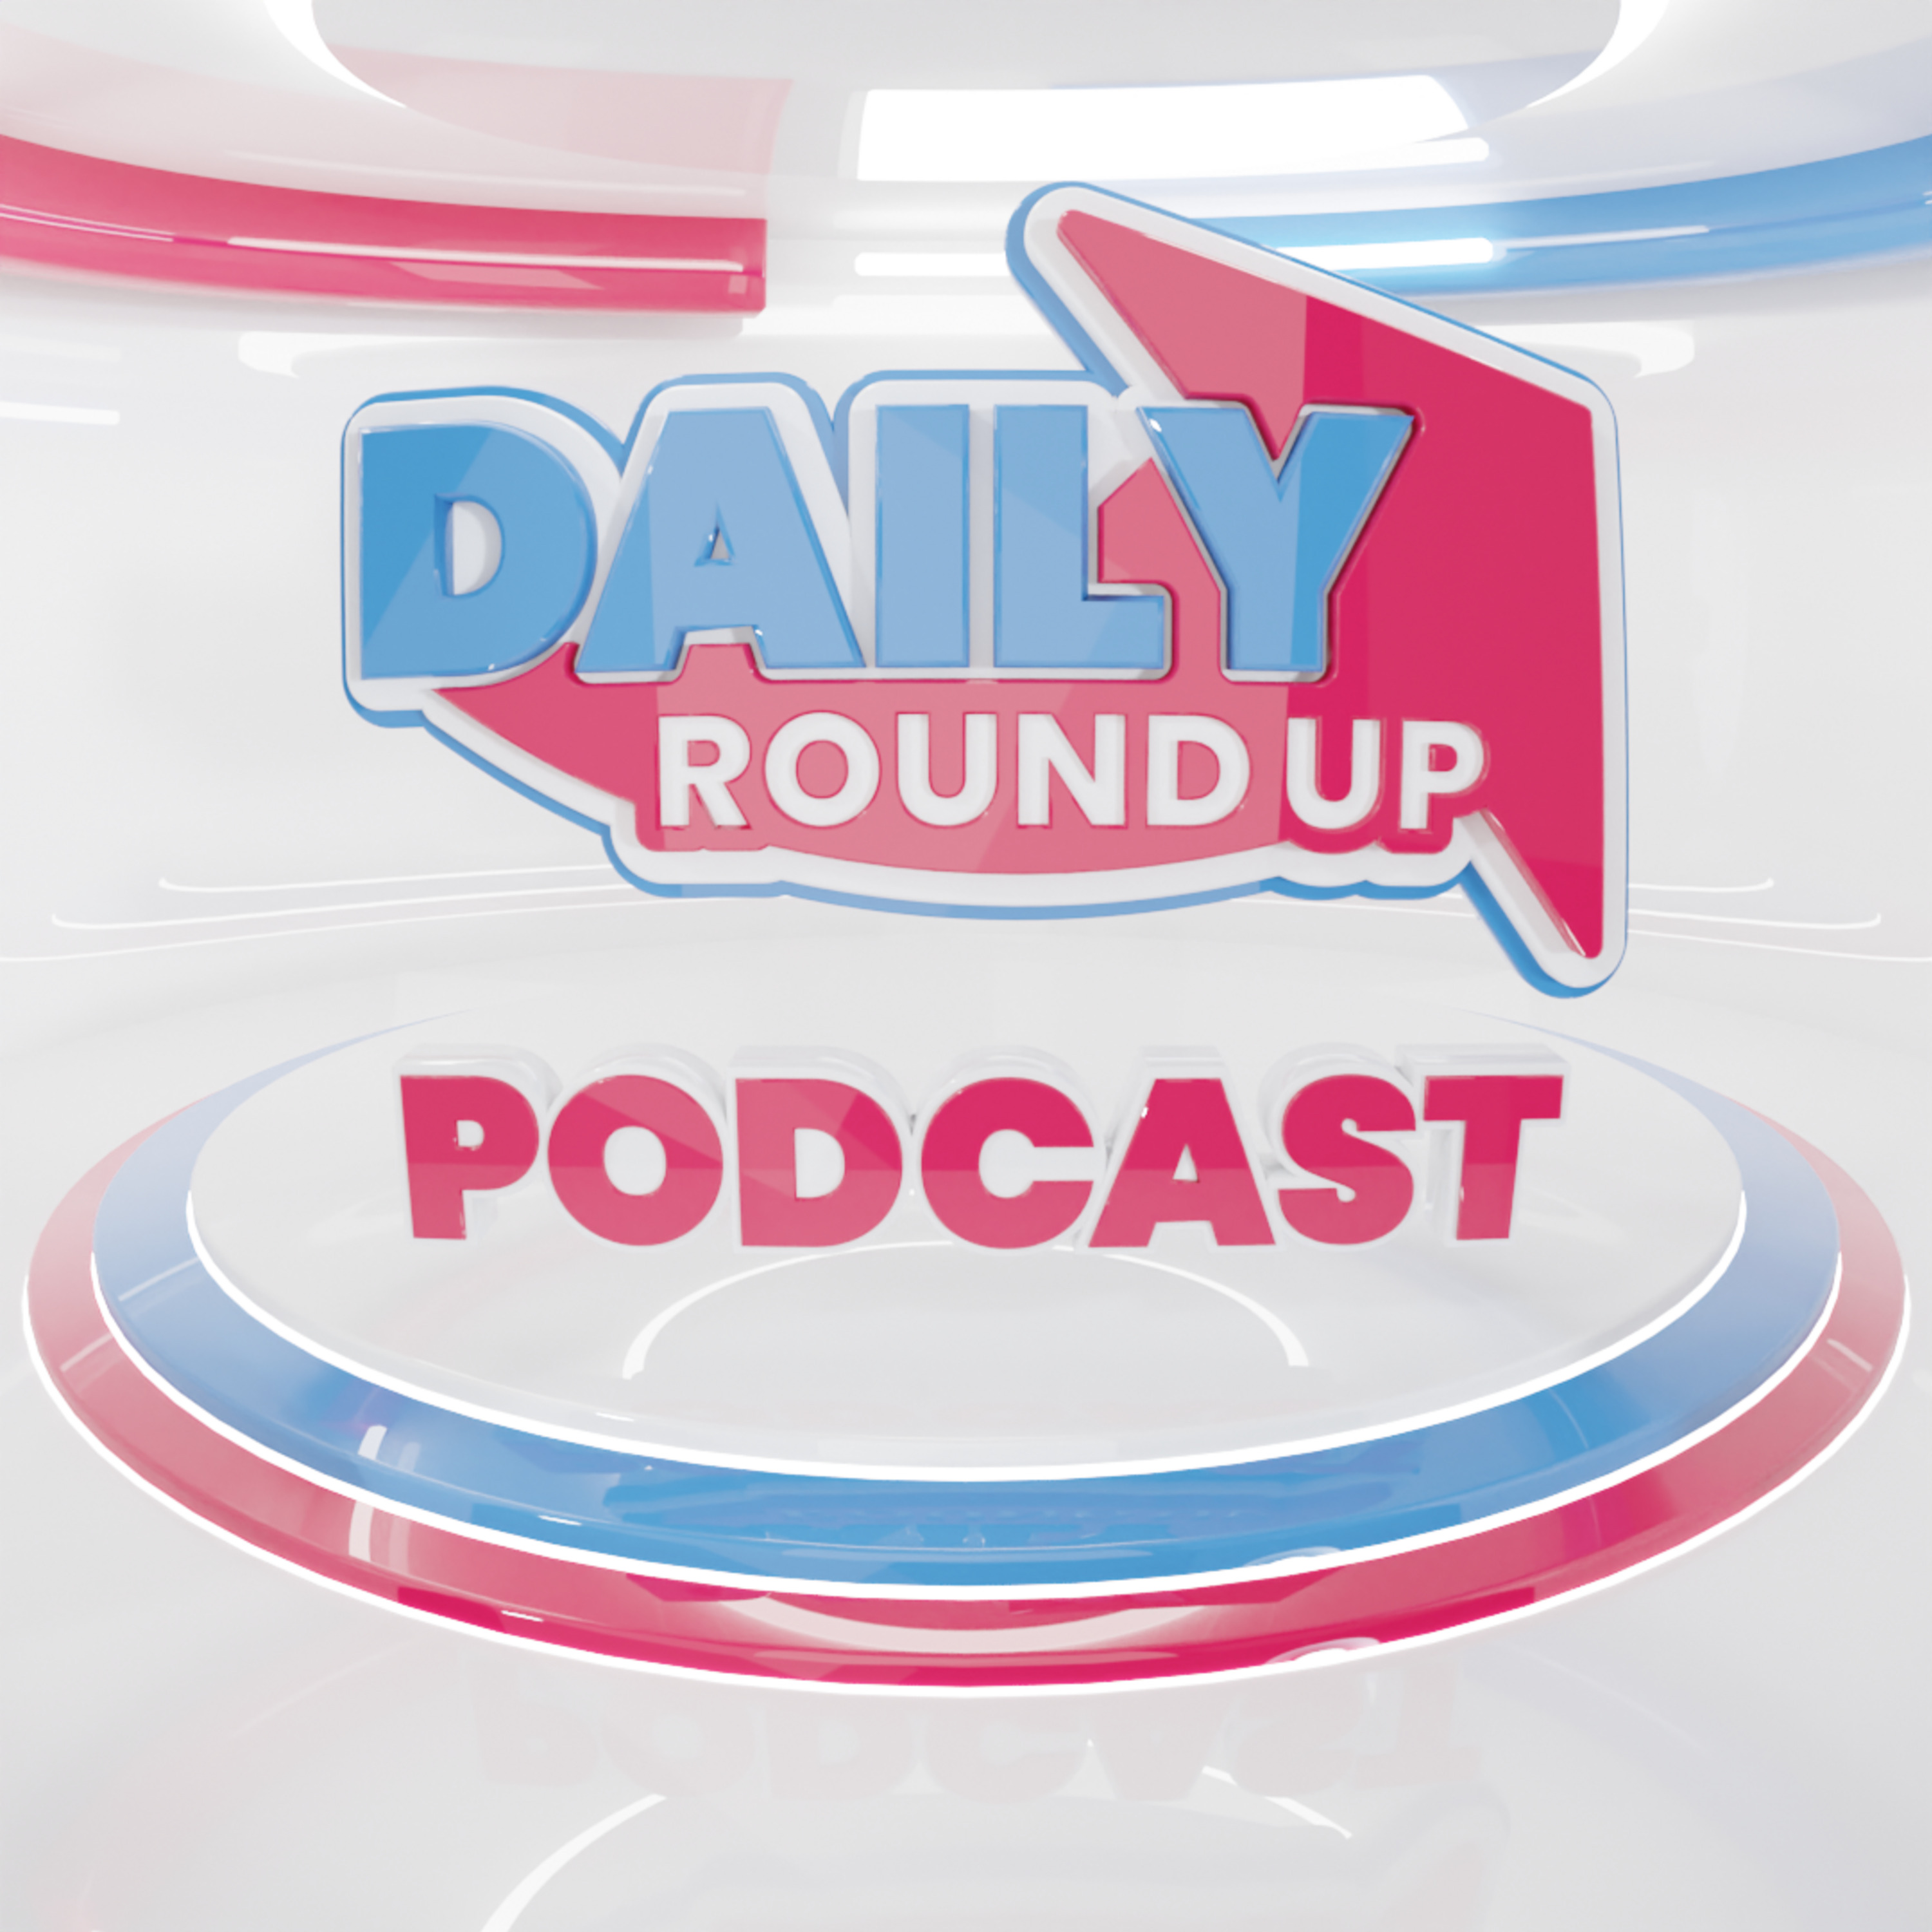 DAILY Roundup | Synagogue firebombed, Jewish senior killed at protest, Female powerlifter suspended